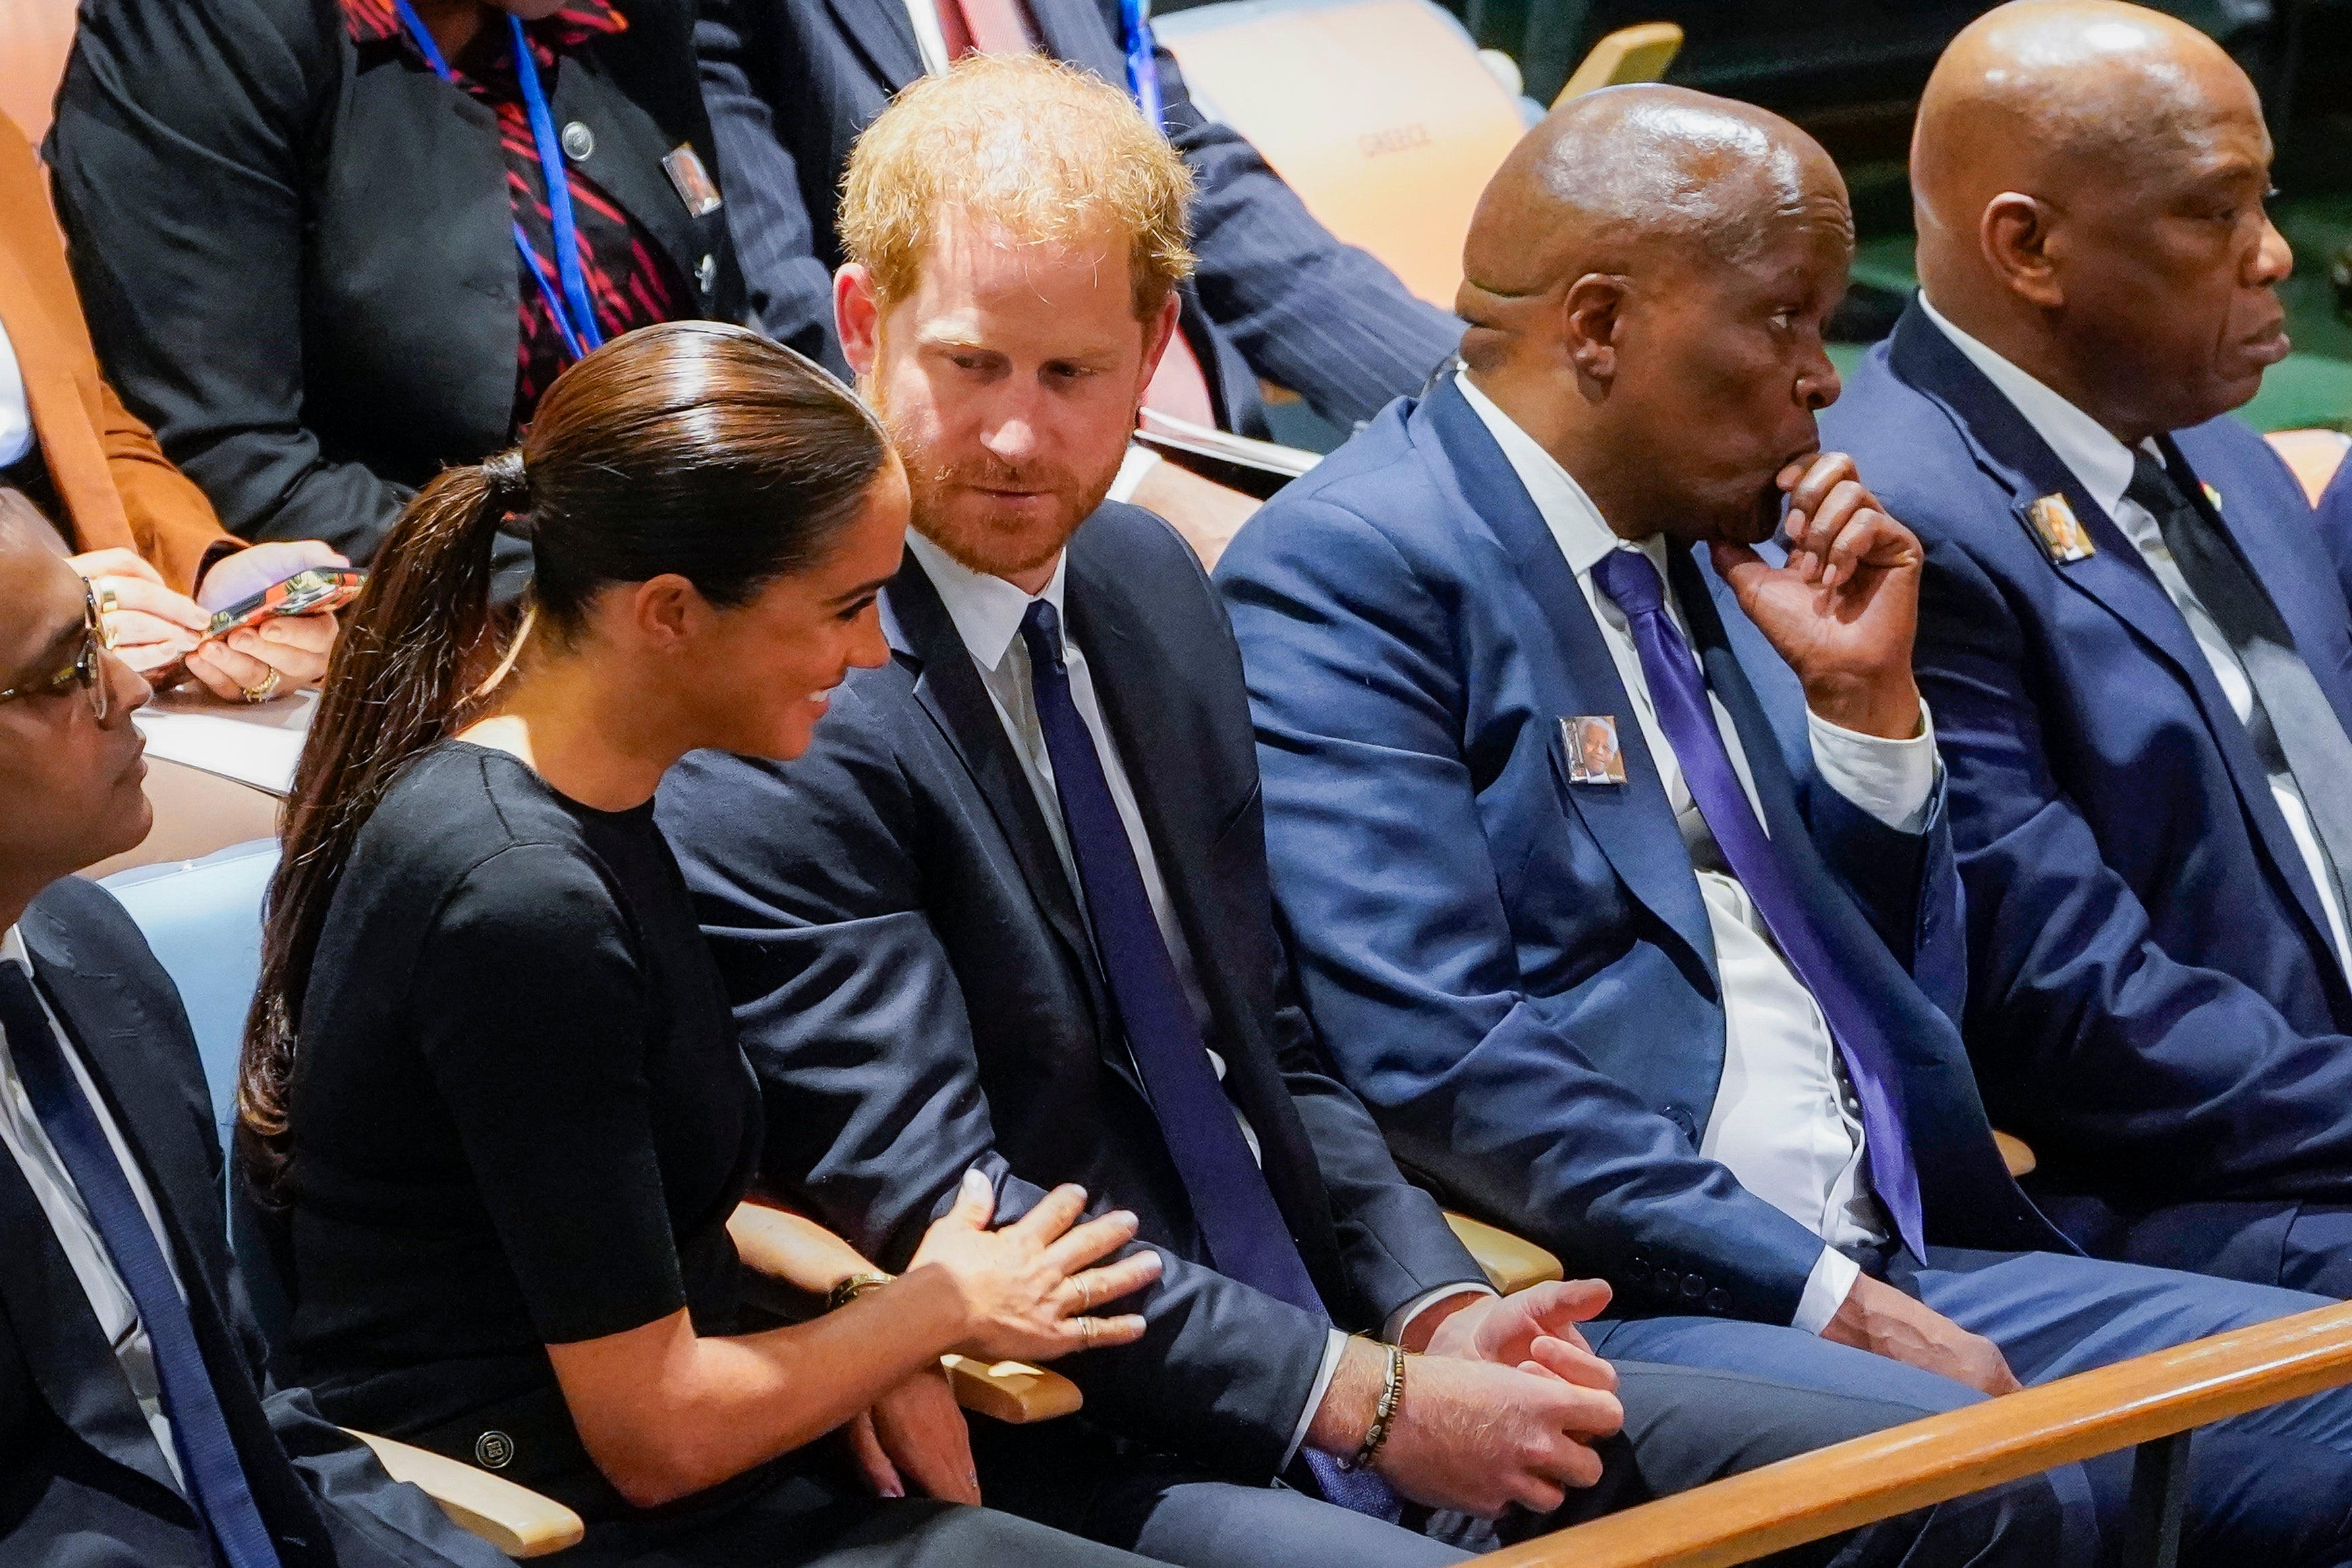 The duke was joined by his actress wife Meghan (John Minchillo/AP)